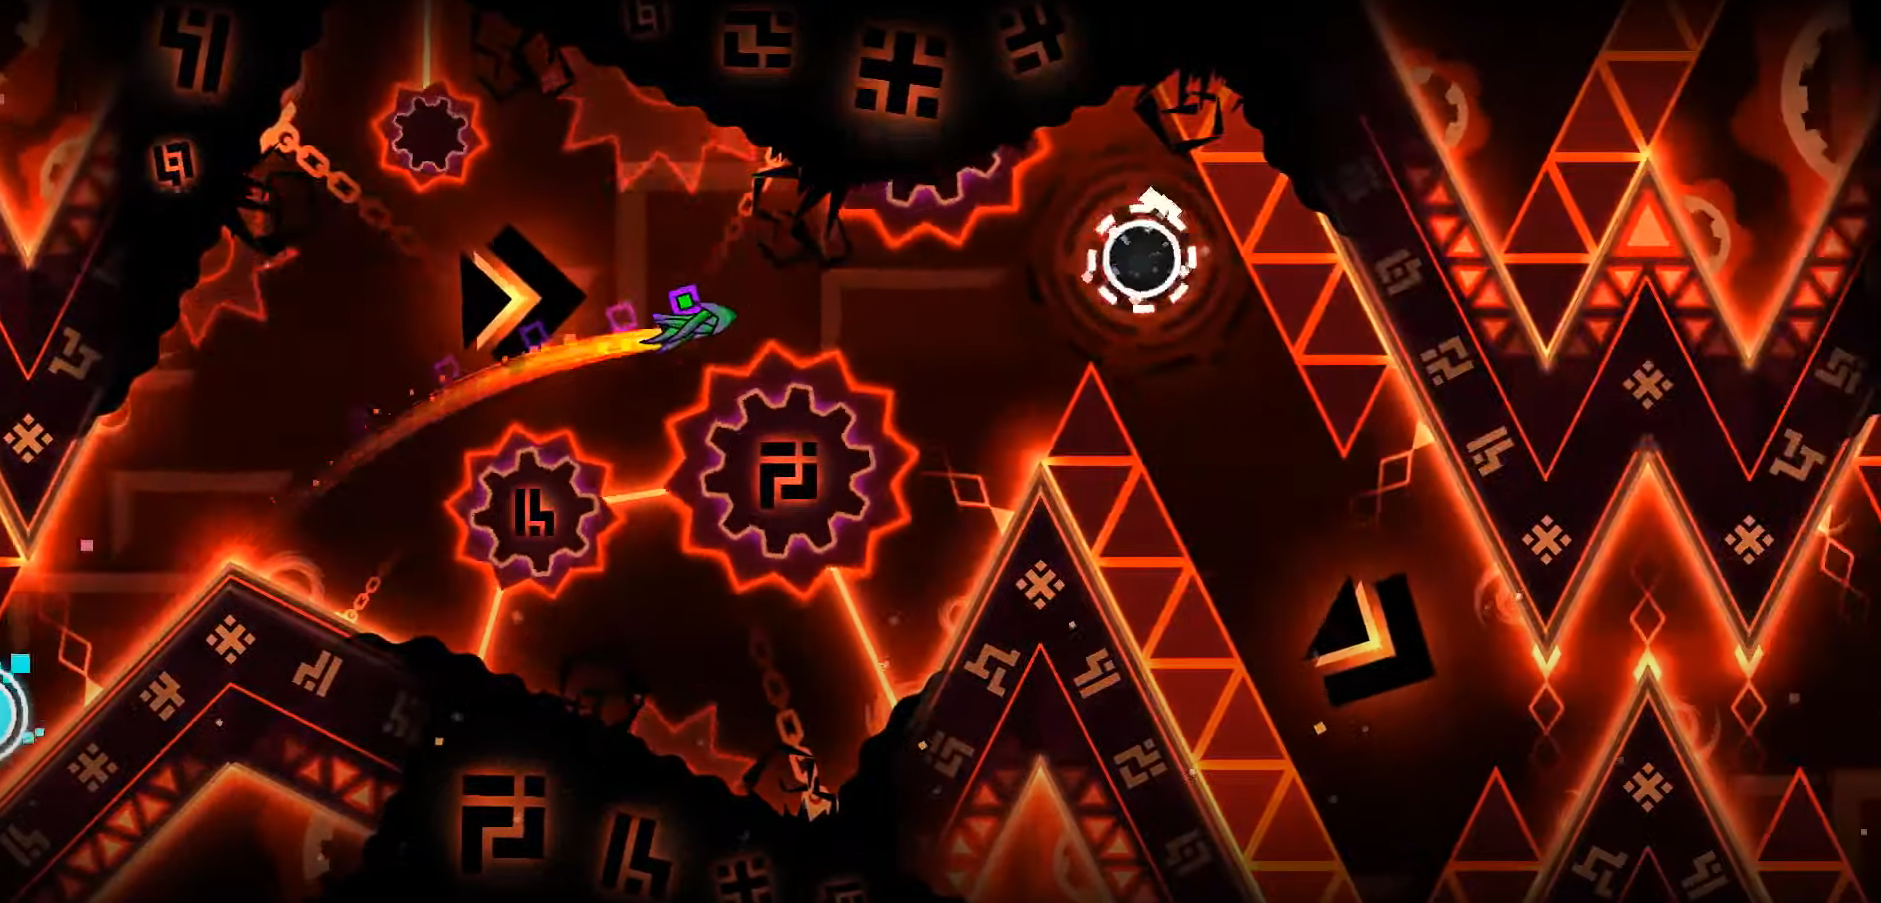 Destiny 2 X Geometry Dash Collab is Coming Soon